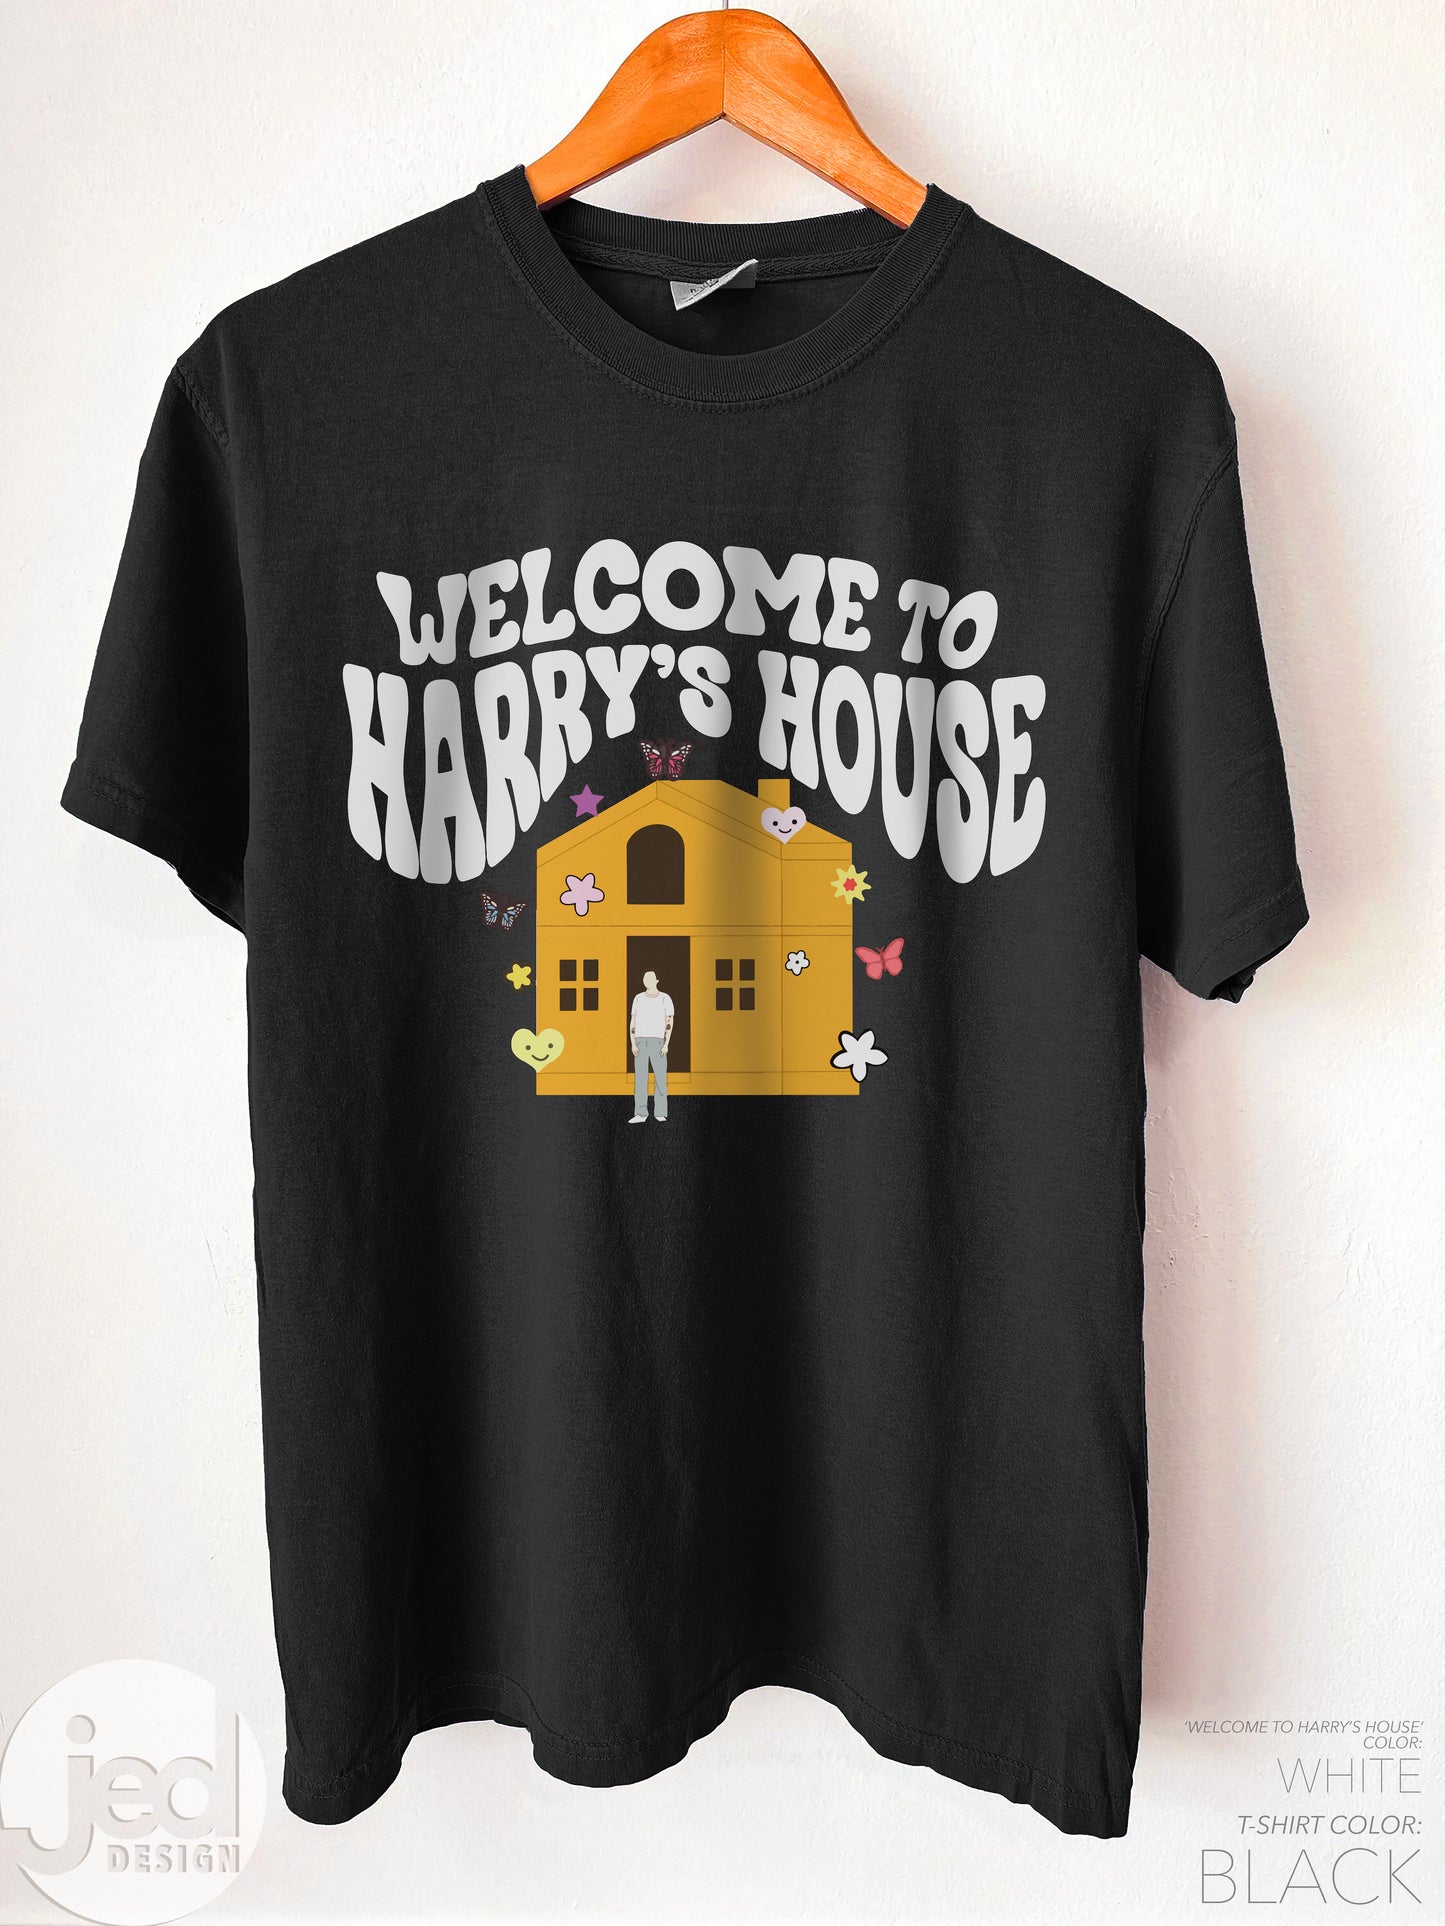 "Welcome to Harry's House" Comfort Colors T-shirt - pear with me